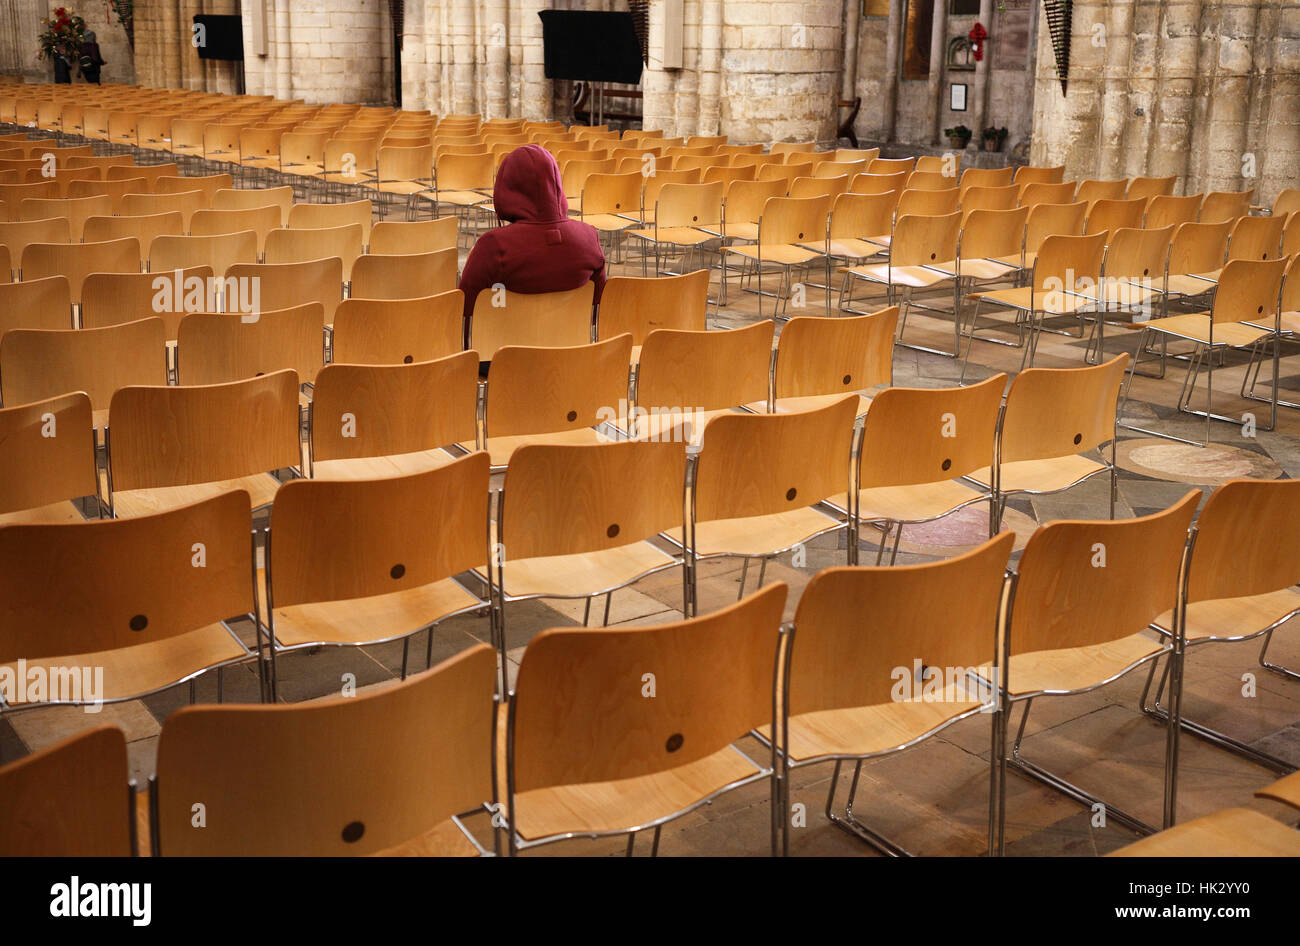 A man in deep contemplation or prayer in Ely Cathedral. Stock Photo